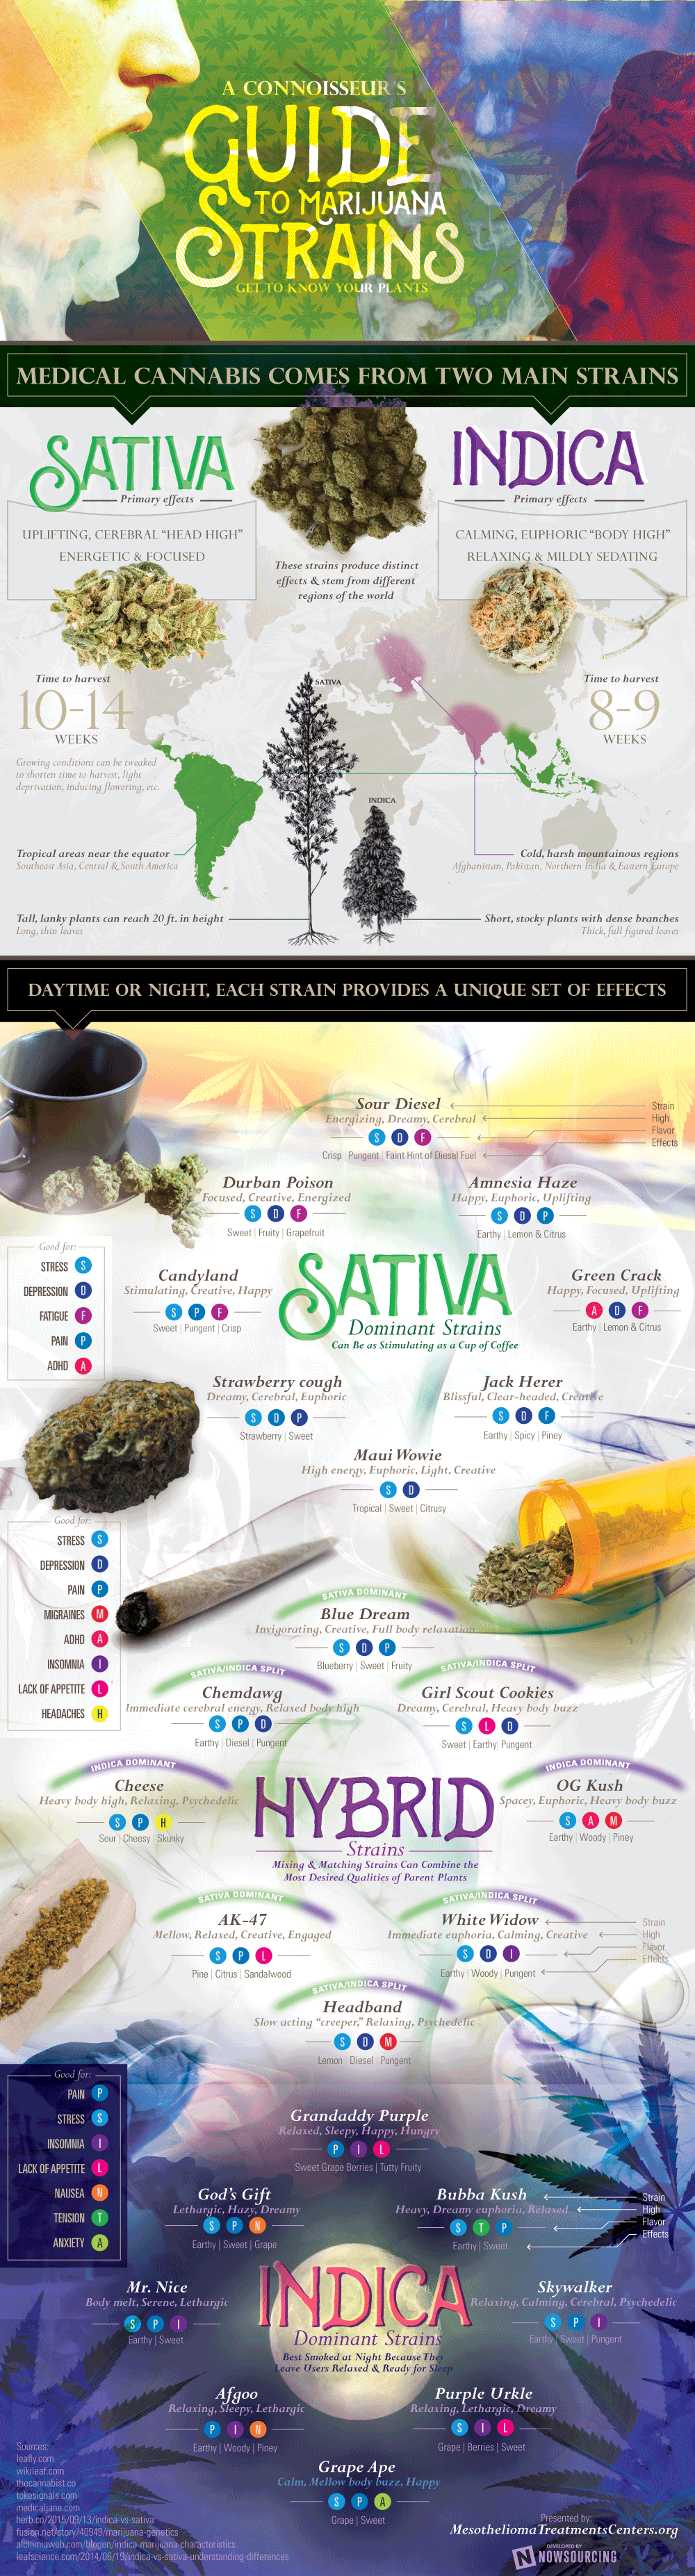 A Connoisseur's Guide To Marijuana Strains